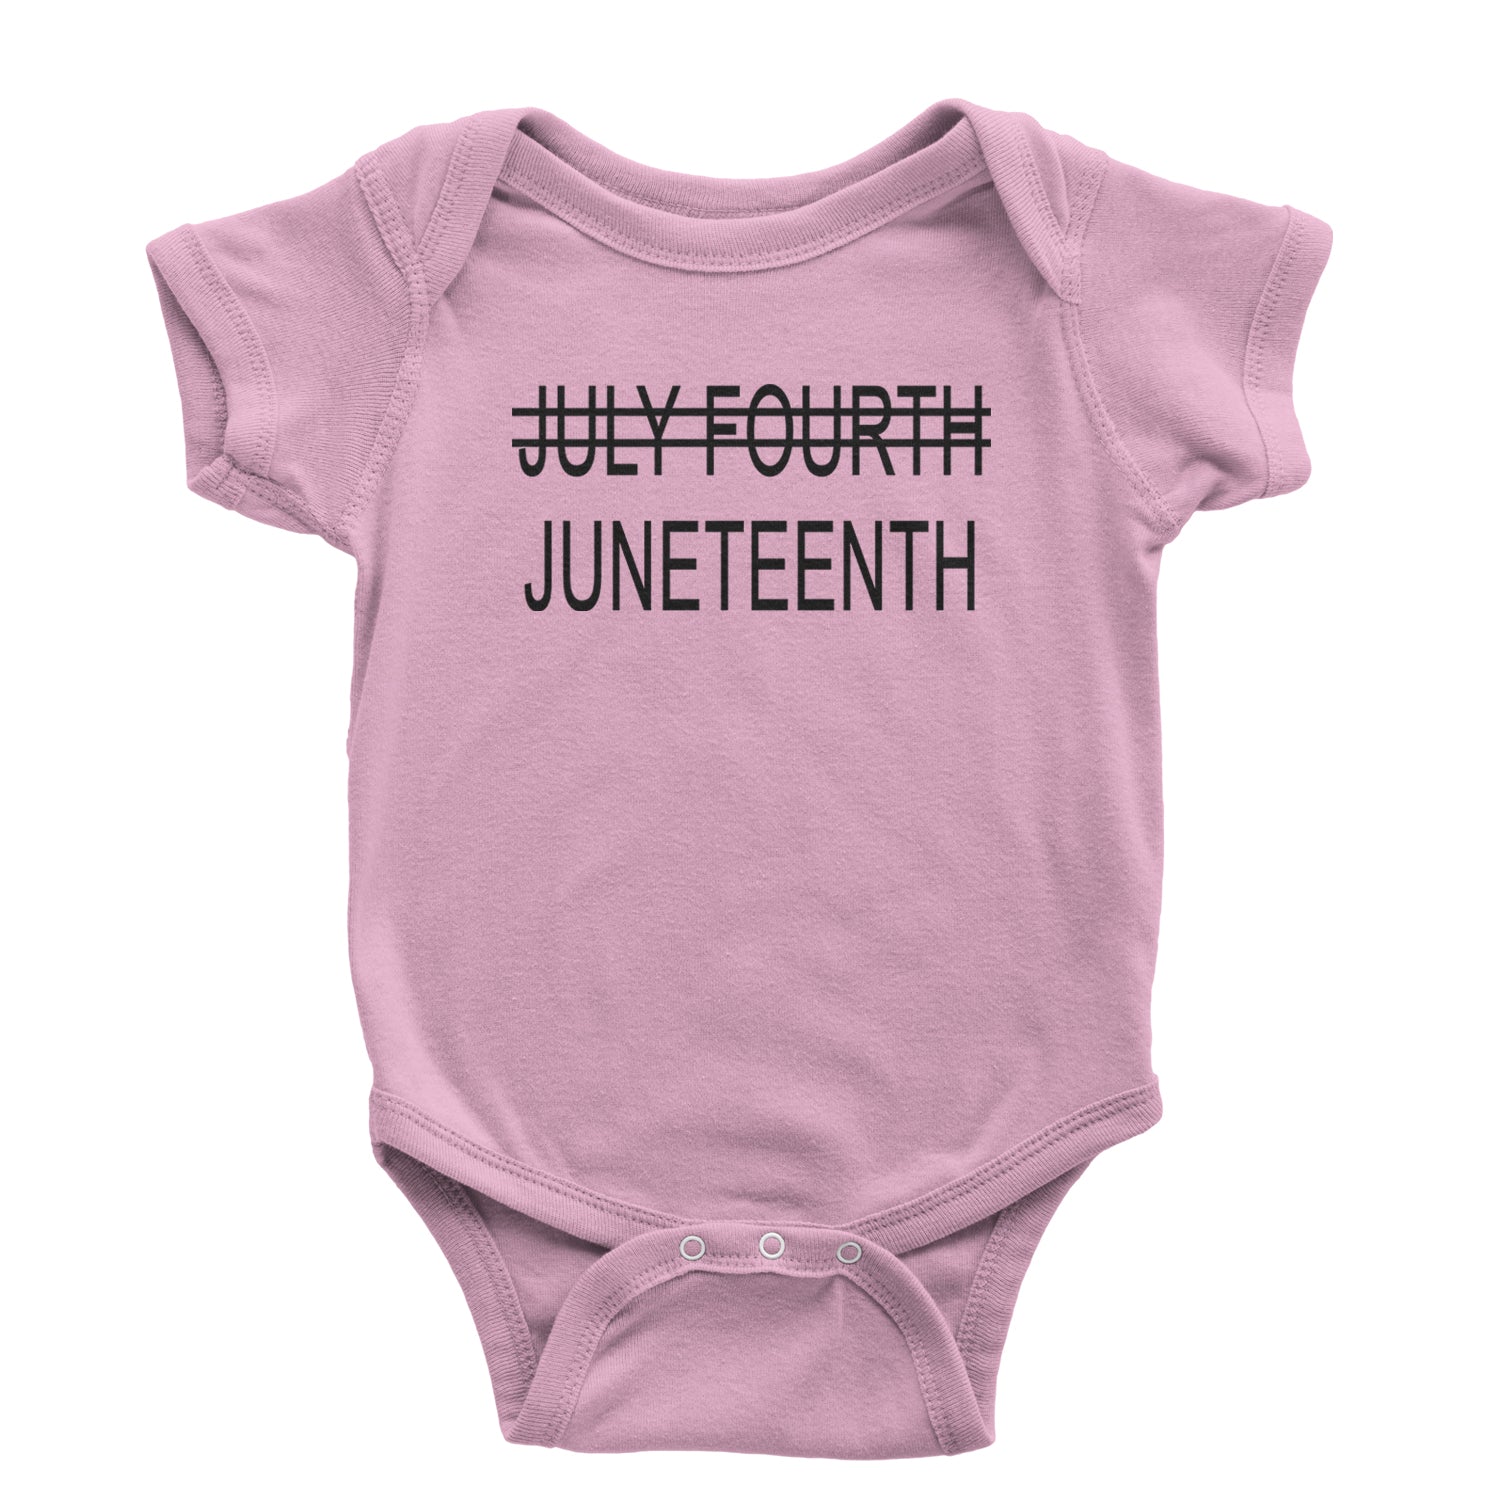 Juneteenth (July Fourth Crossed Out) Jubilee Infant One-Piece Romper Bodysuit and Toddler T-shirt